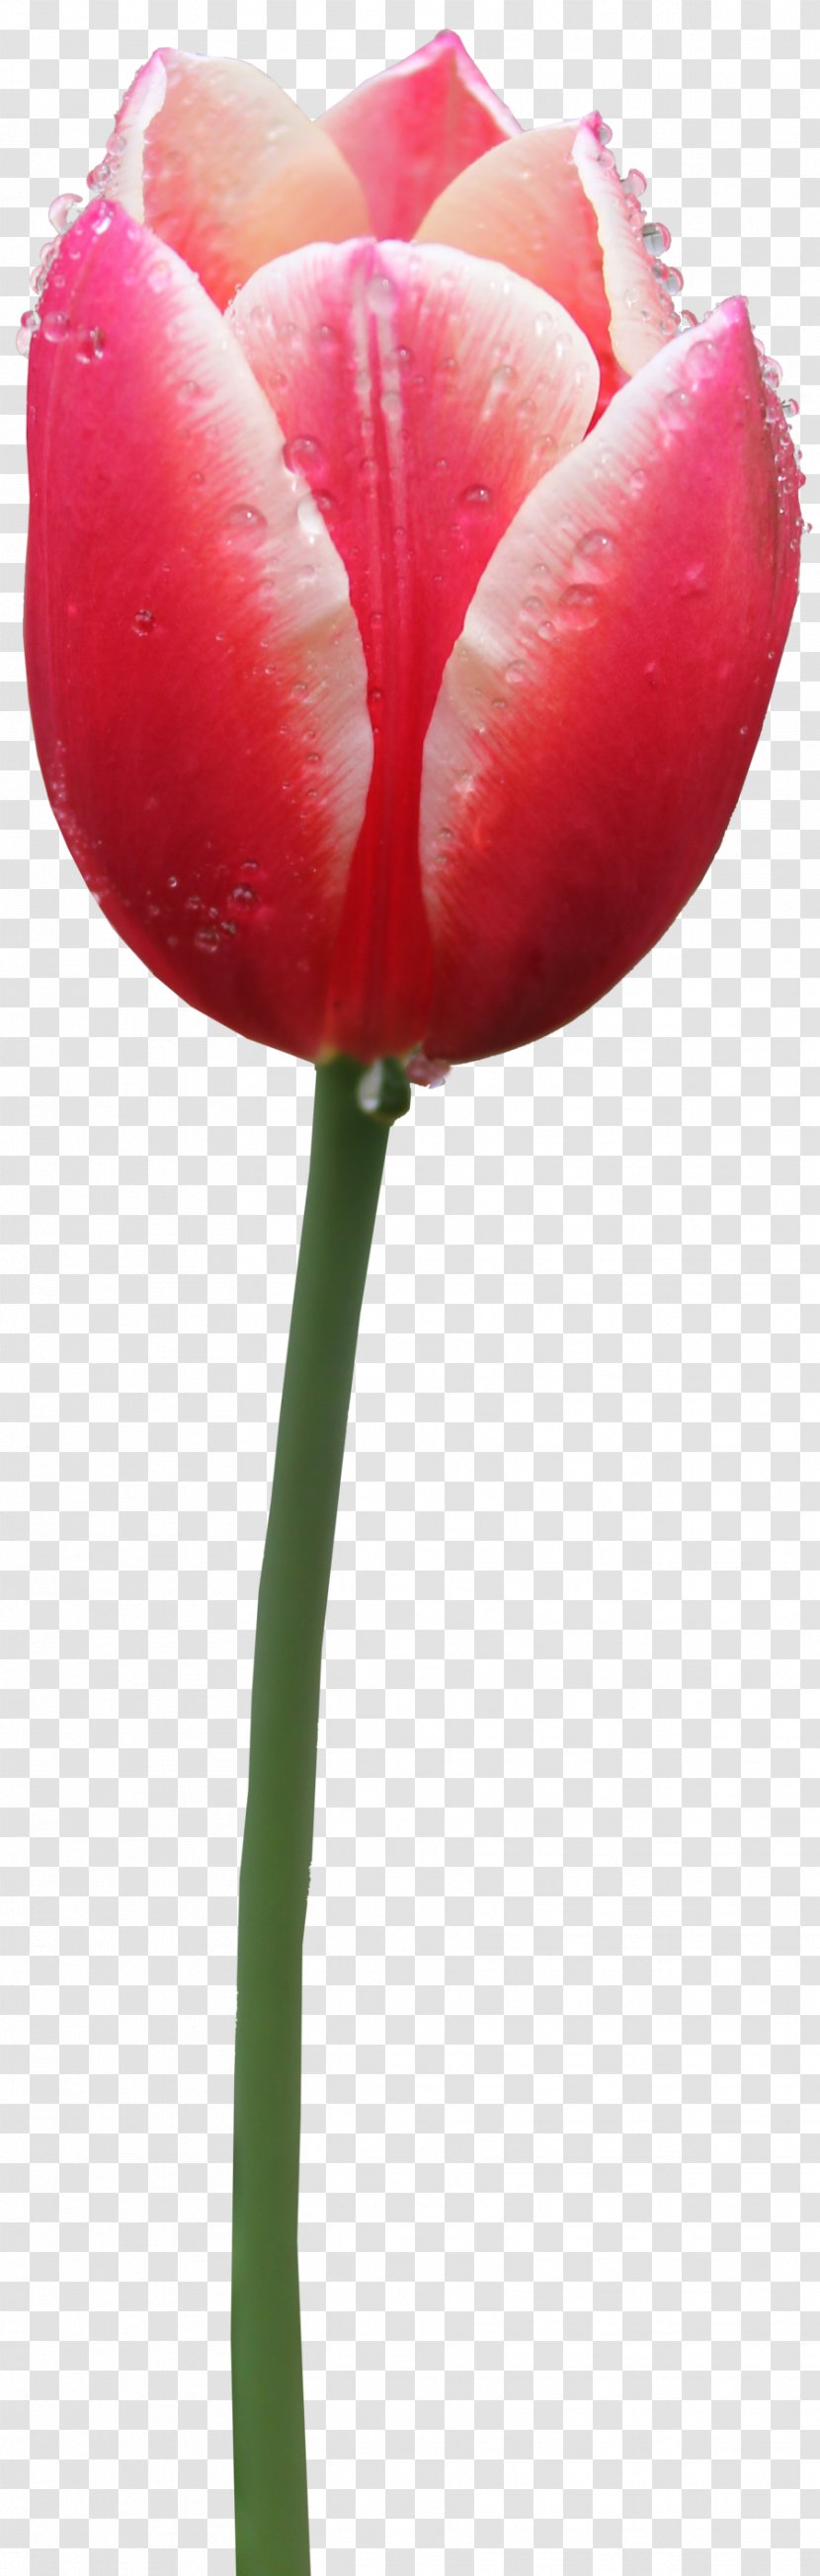 Tulip - Lily Family - Free Image Transparent PNG